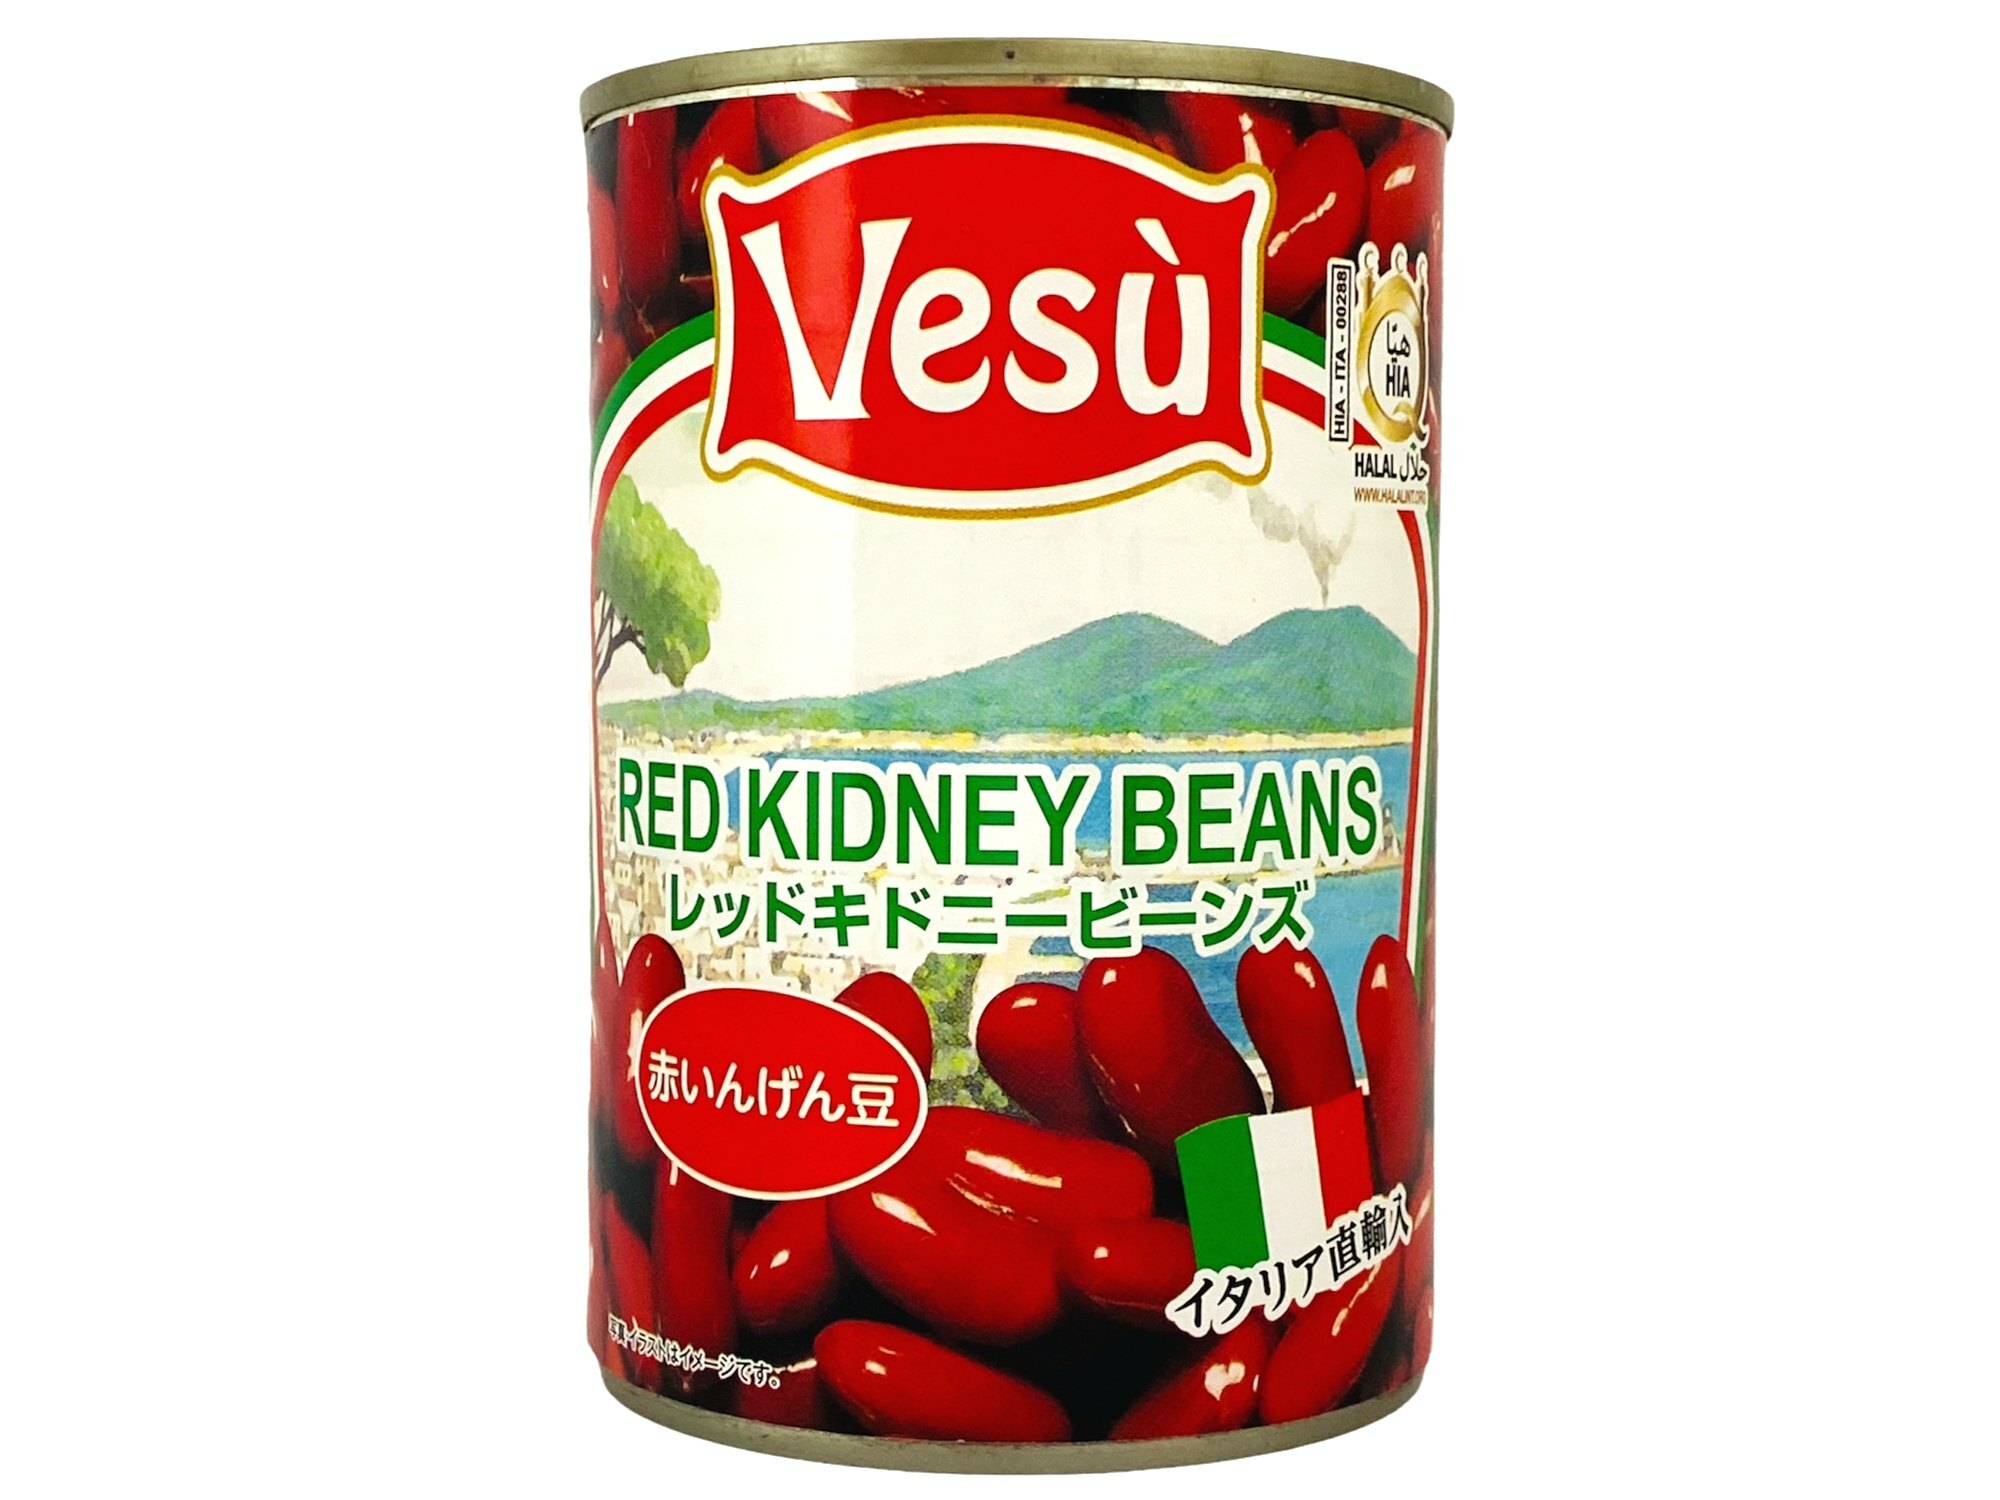 Vesu Red Kidney Beans. Made in Italy!